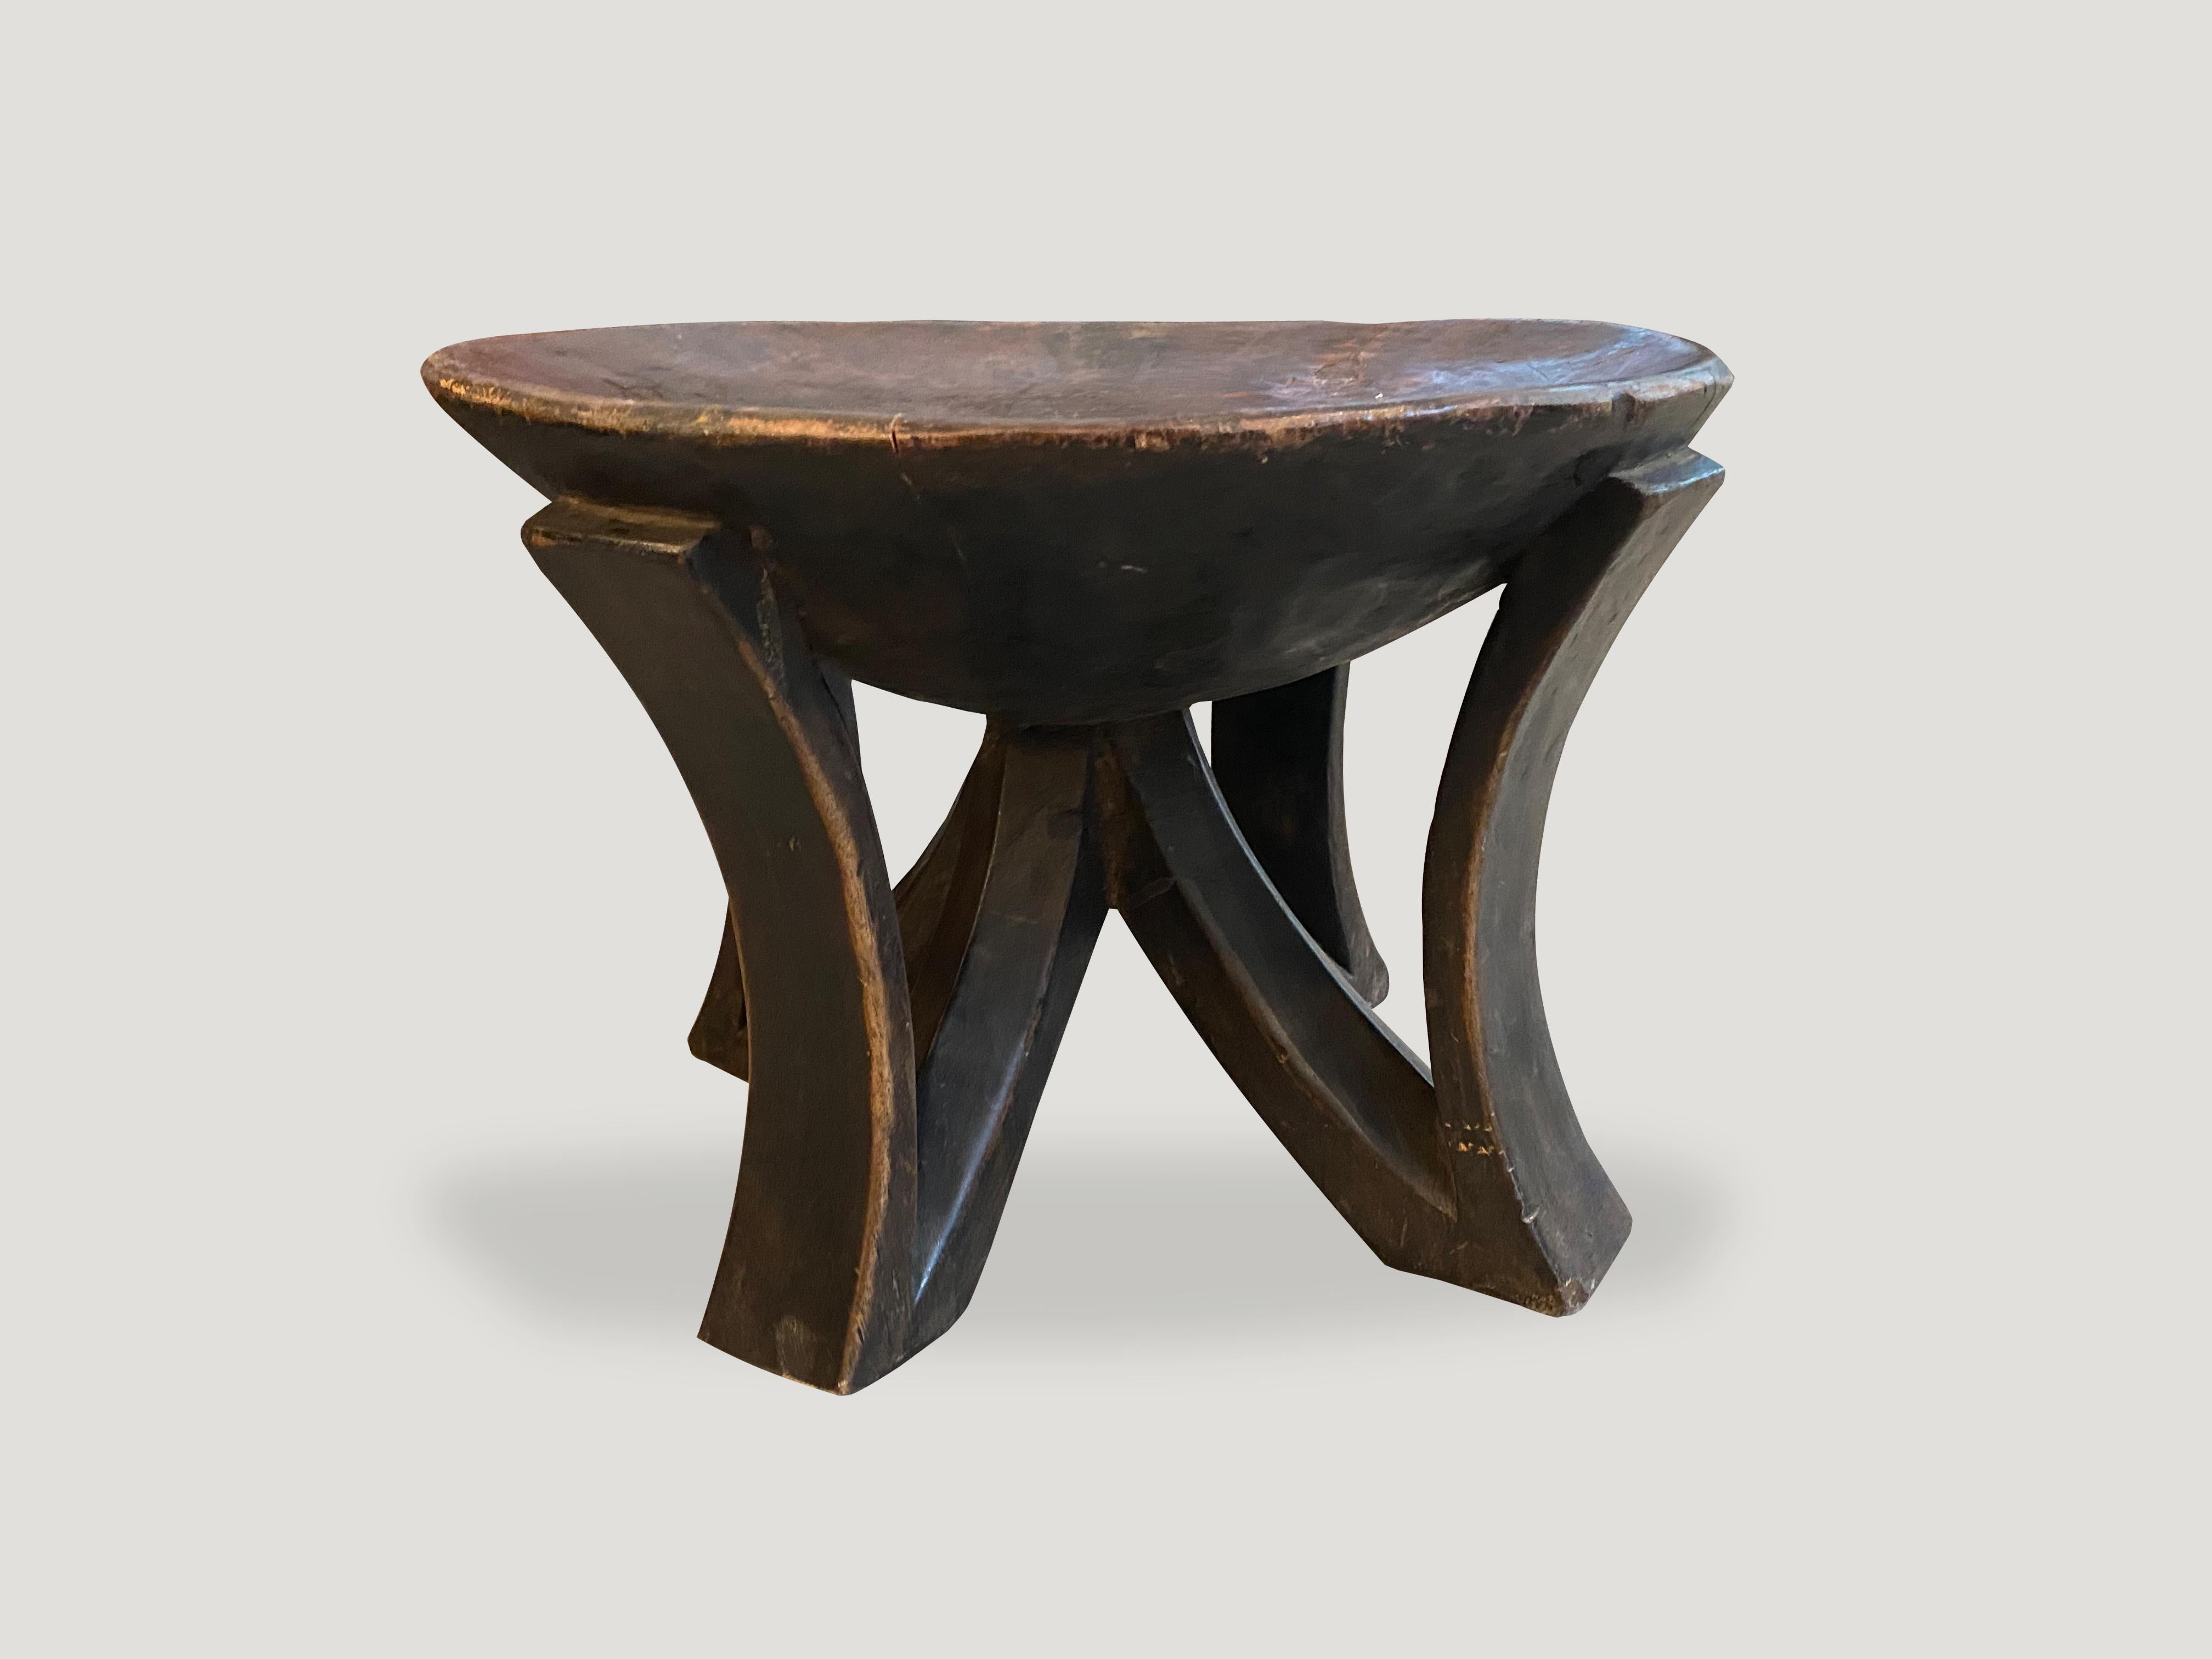 Hand carved from a single piece of mahogany wood, an African mahogany side table or bowl. Great for placing a book or perhaps towels in a bathroom, magazines etc. A beautiful, versatile item that is both sculptural and usable.

This side table or